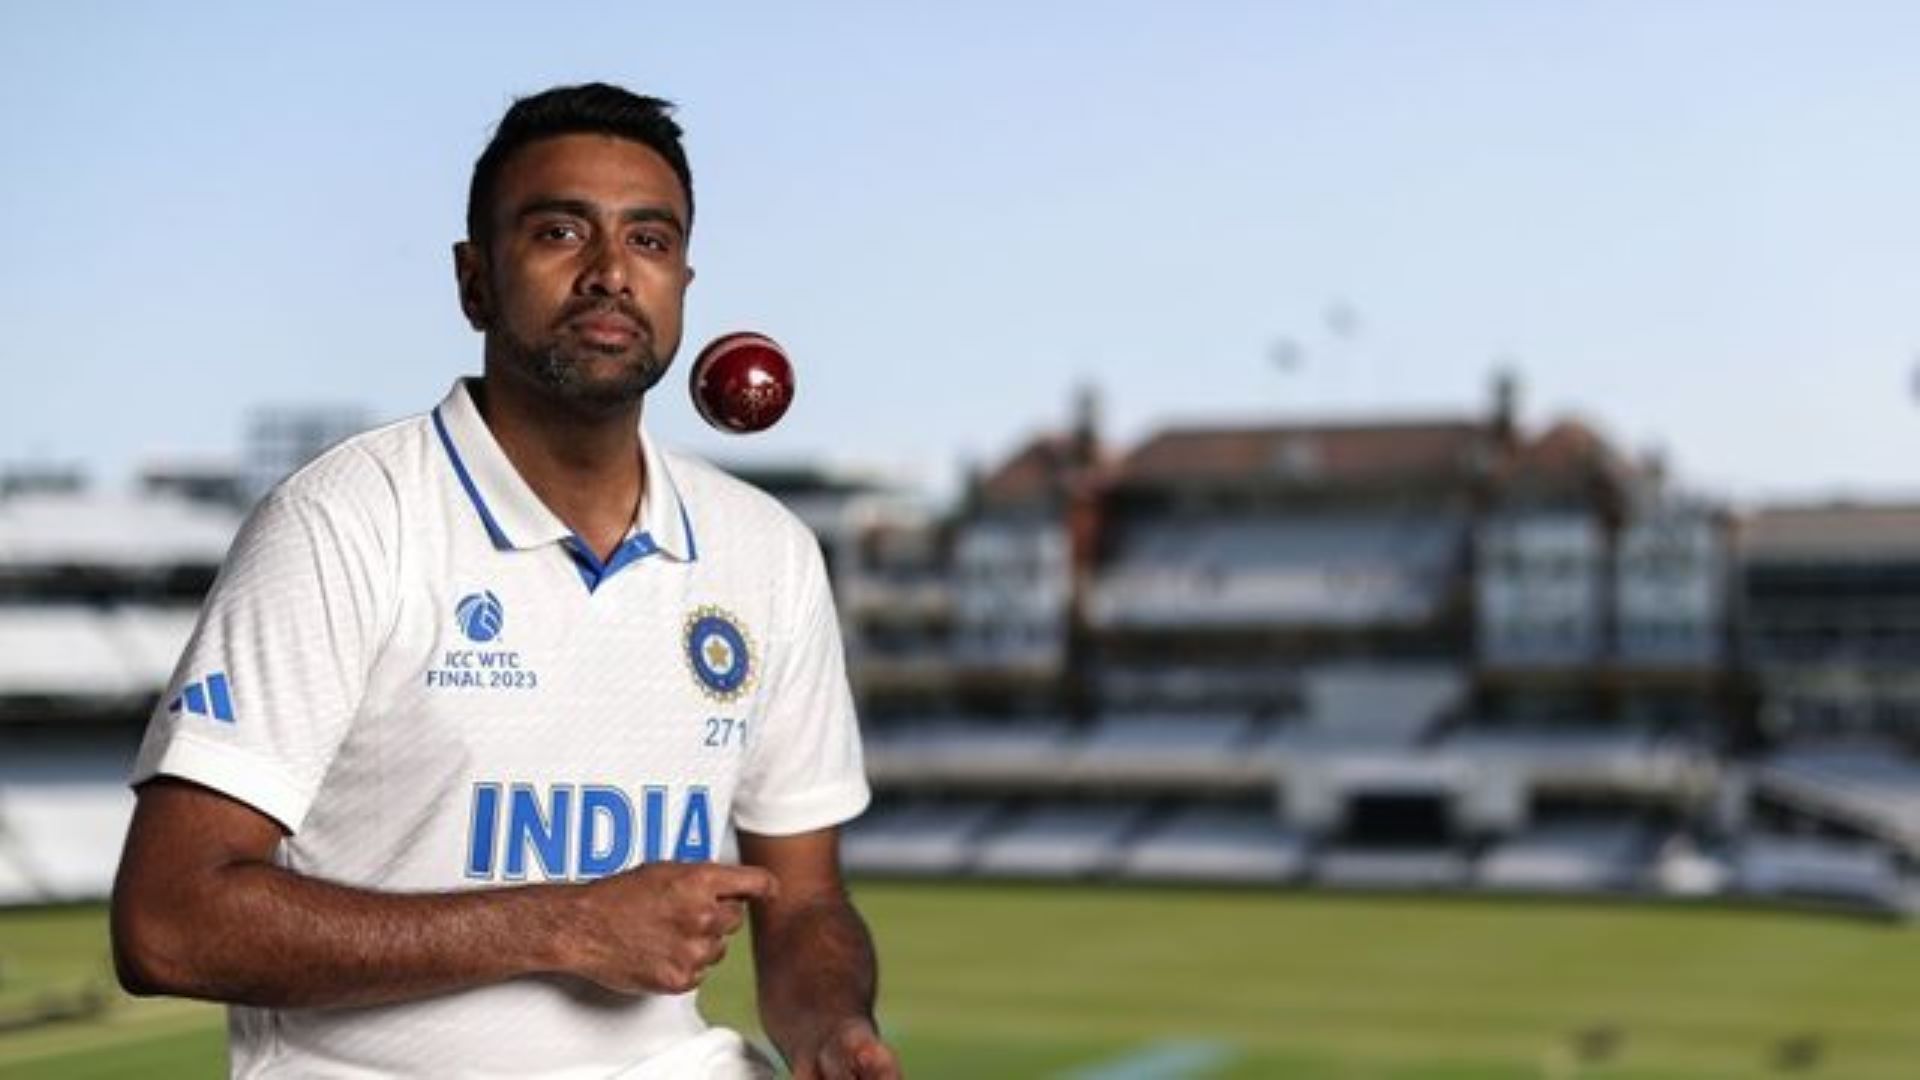 Ravi Ashwin will look to help India win their first WTC title